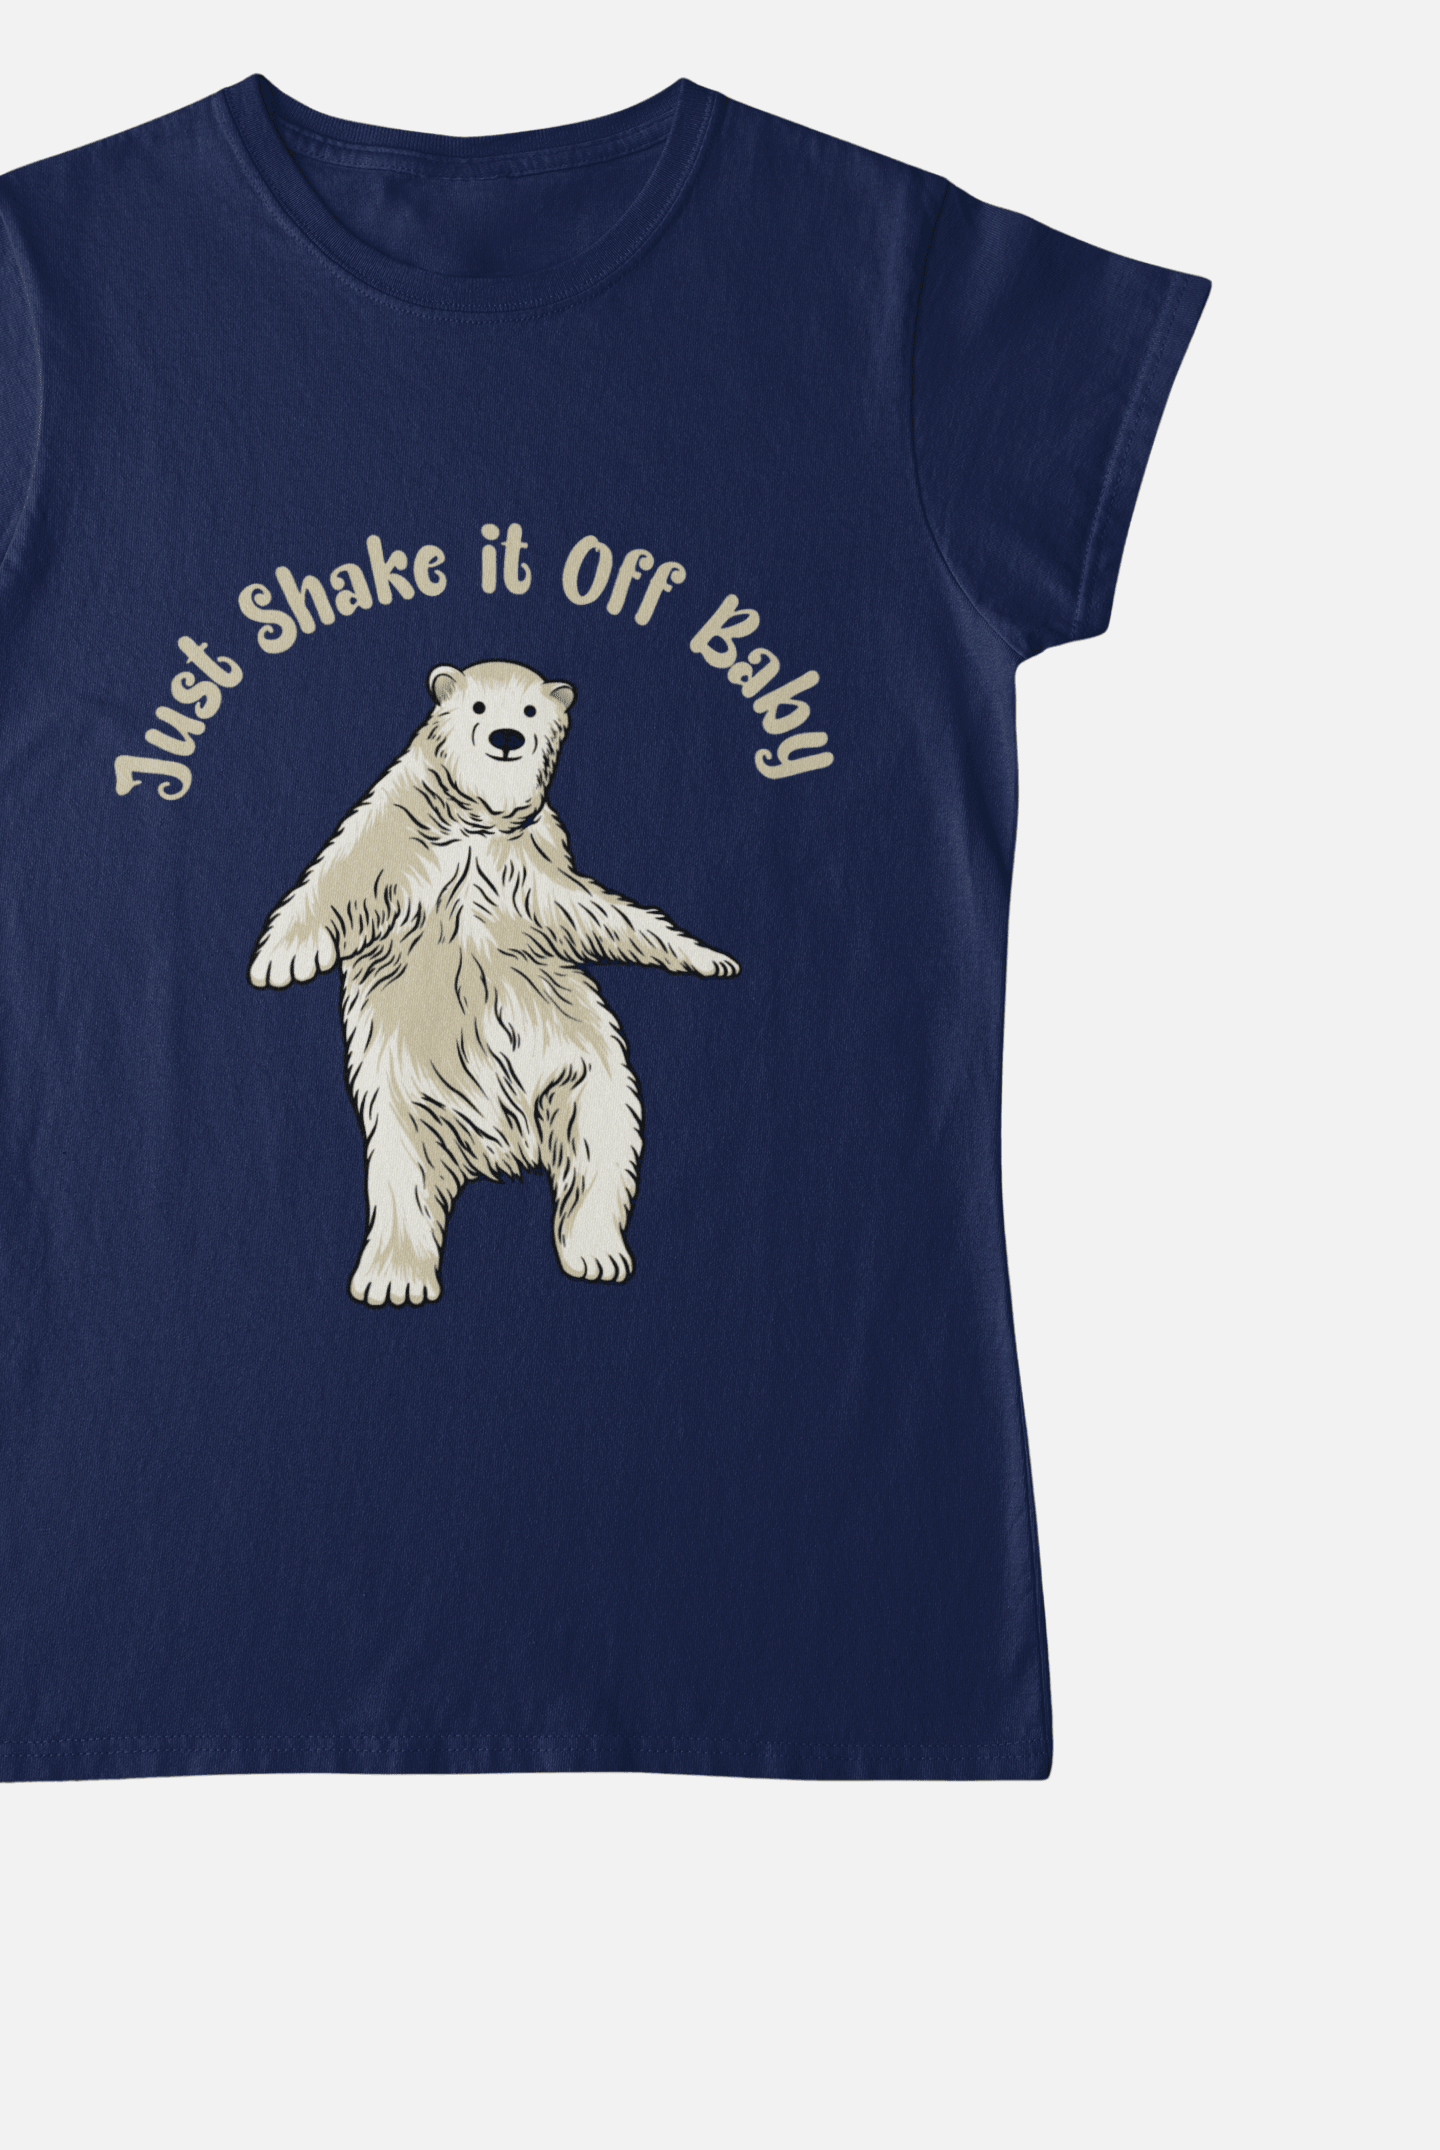 Just Shake It Off Baby Navy Blue T-Shirt For Women - ATOM